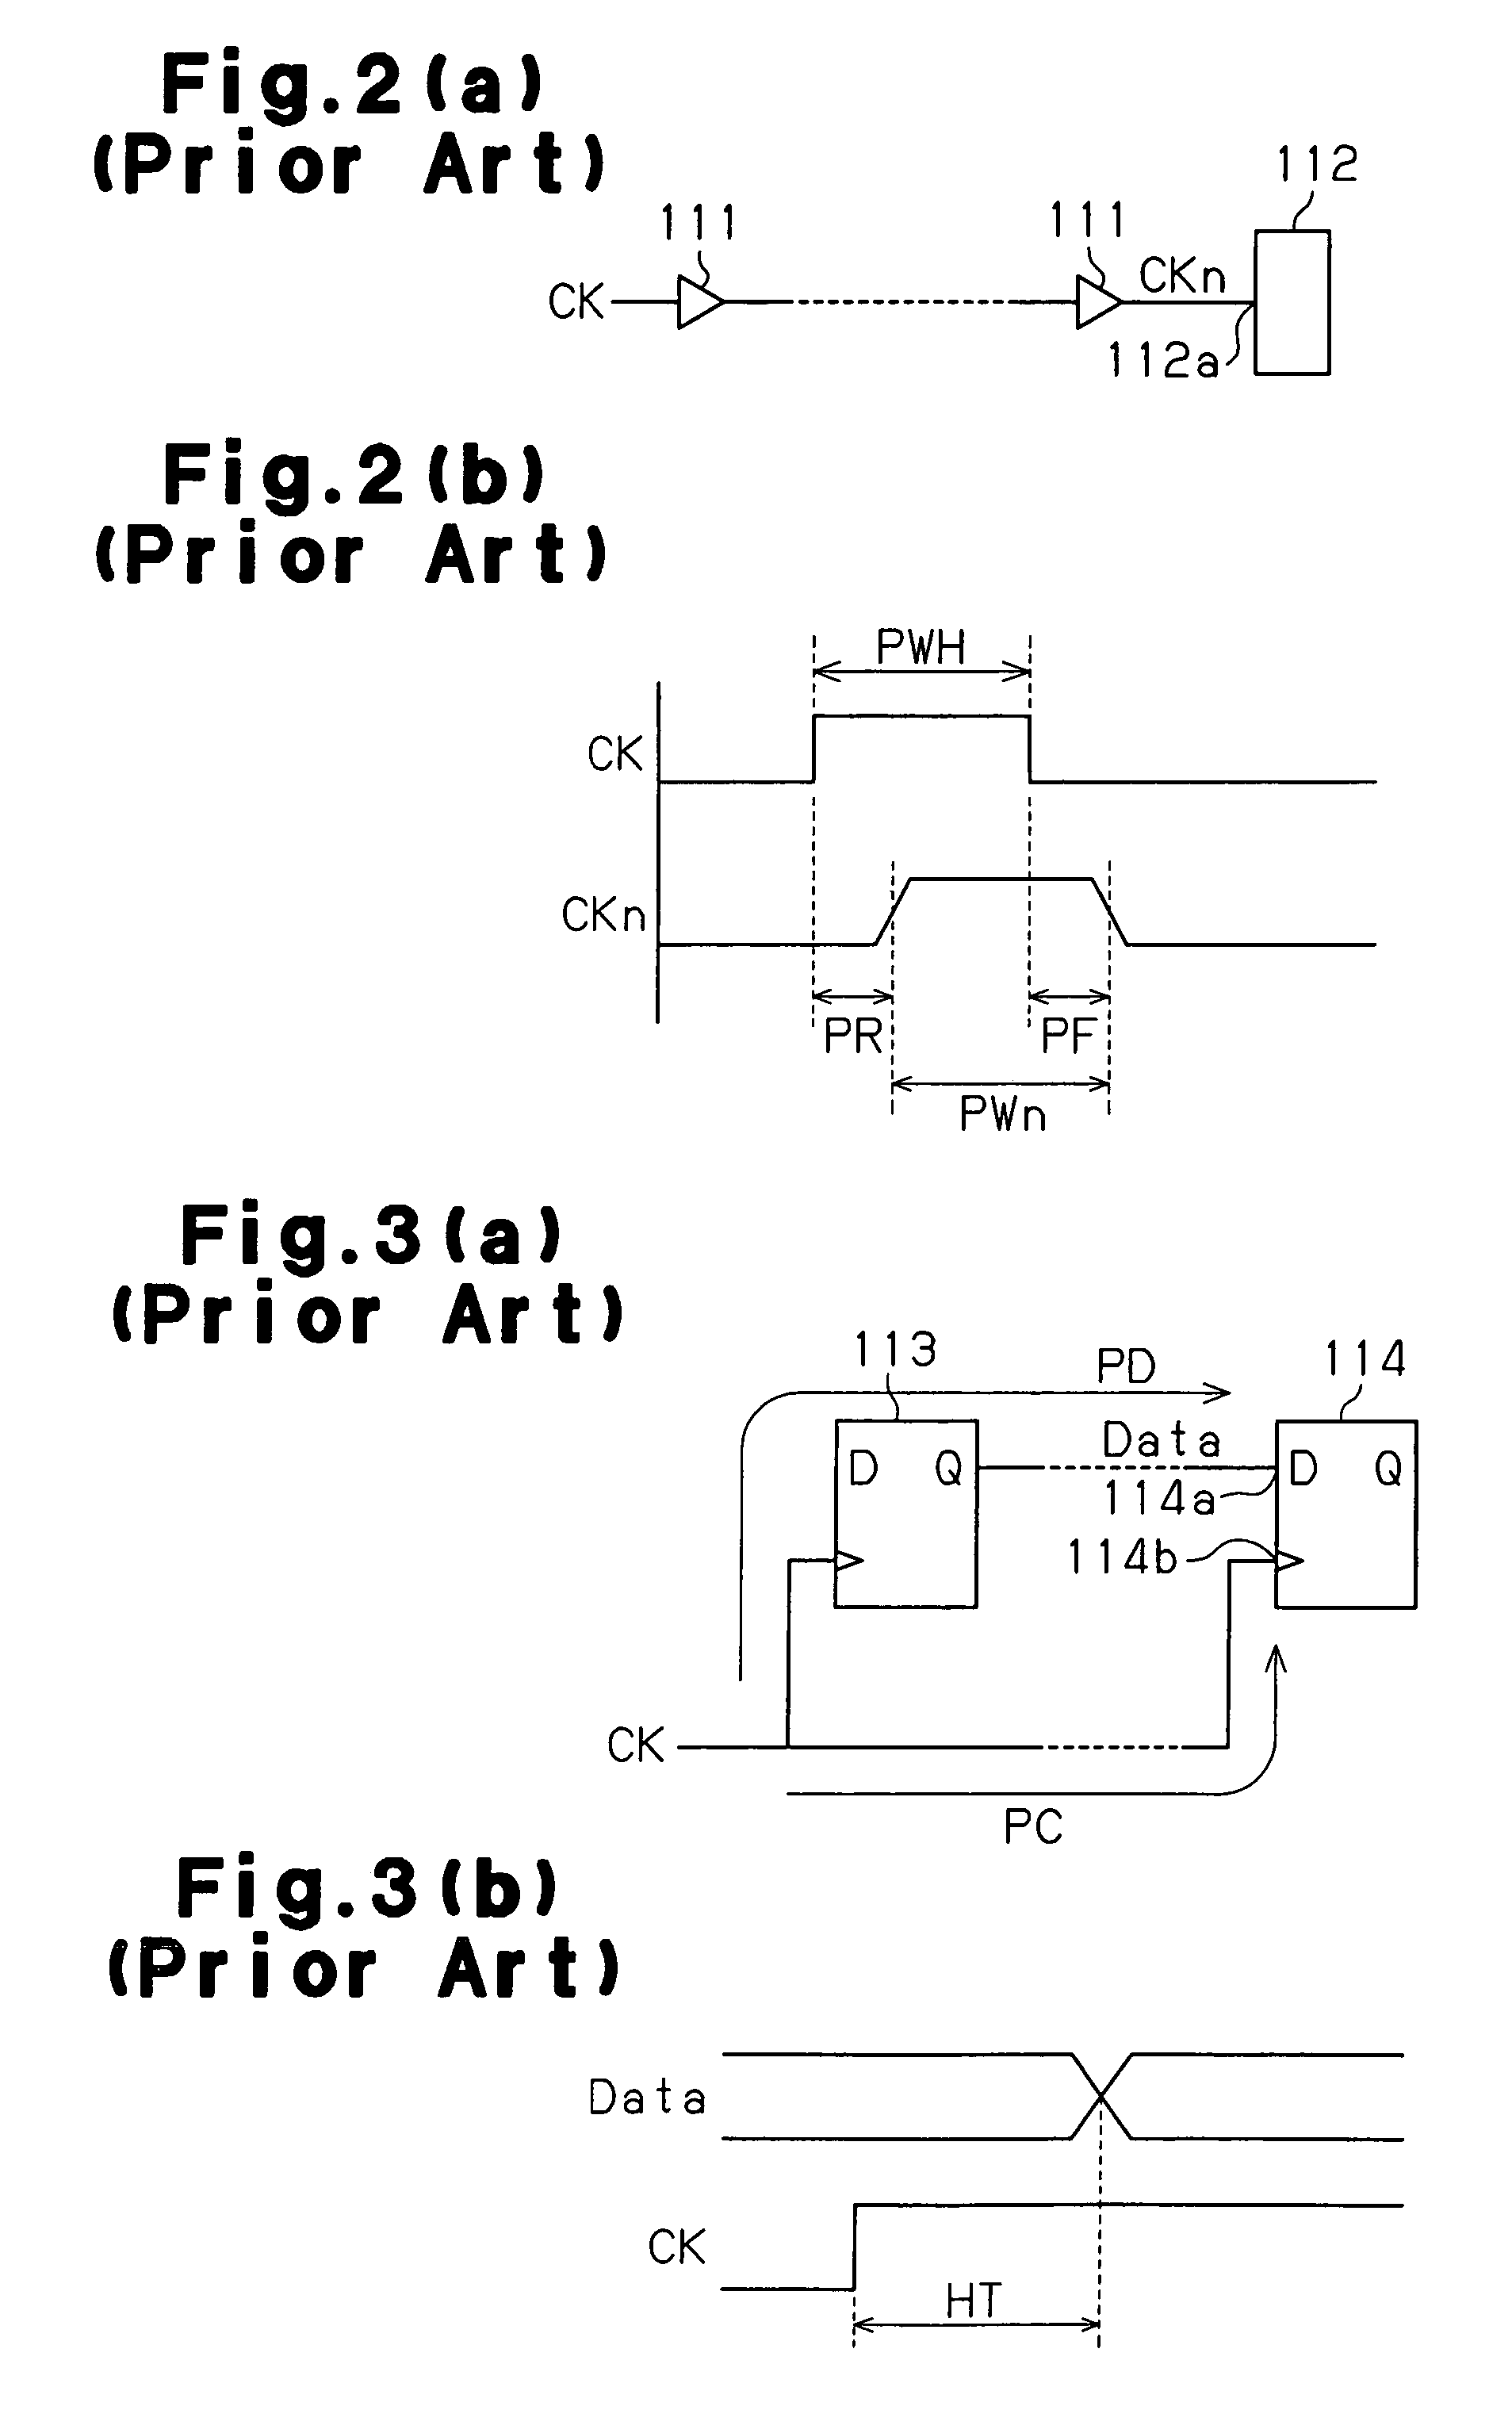 Method and apparatus for verifying semiconductor integrated circuits